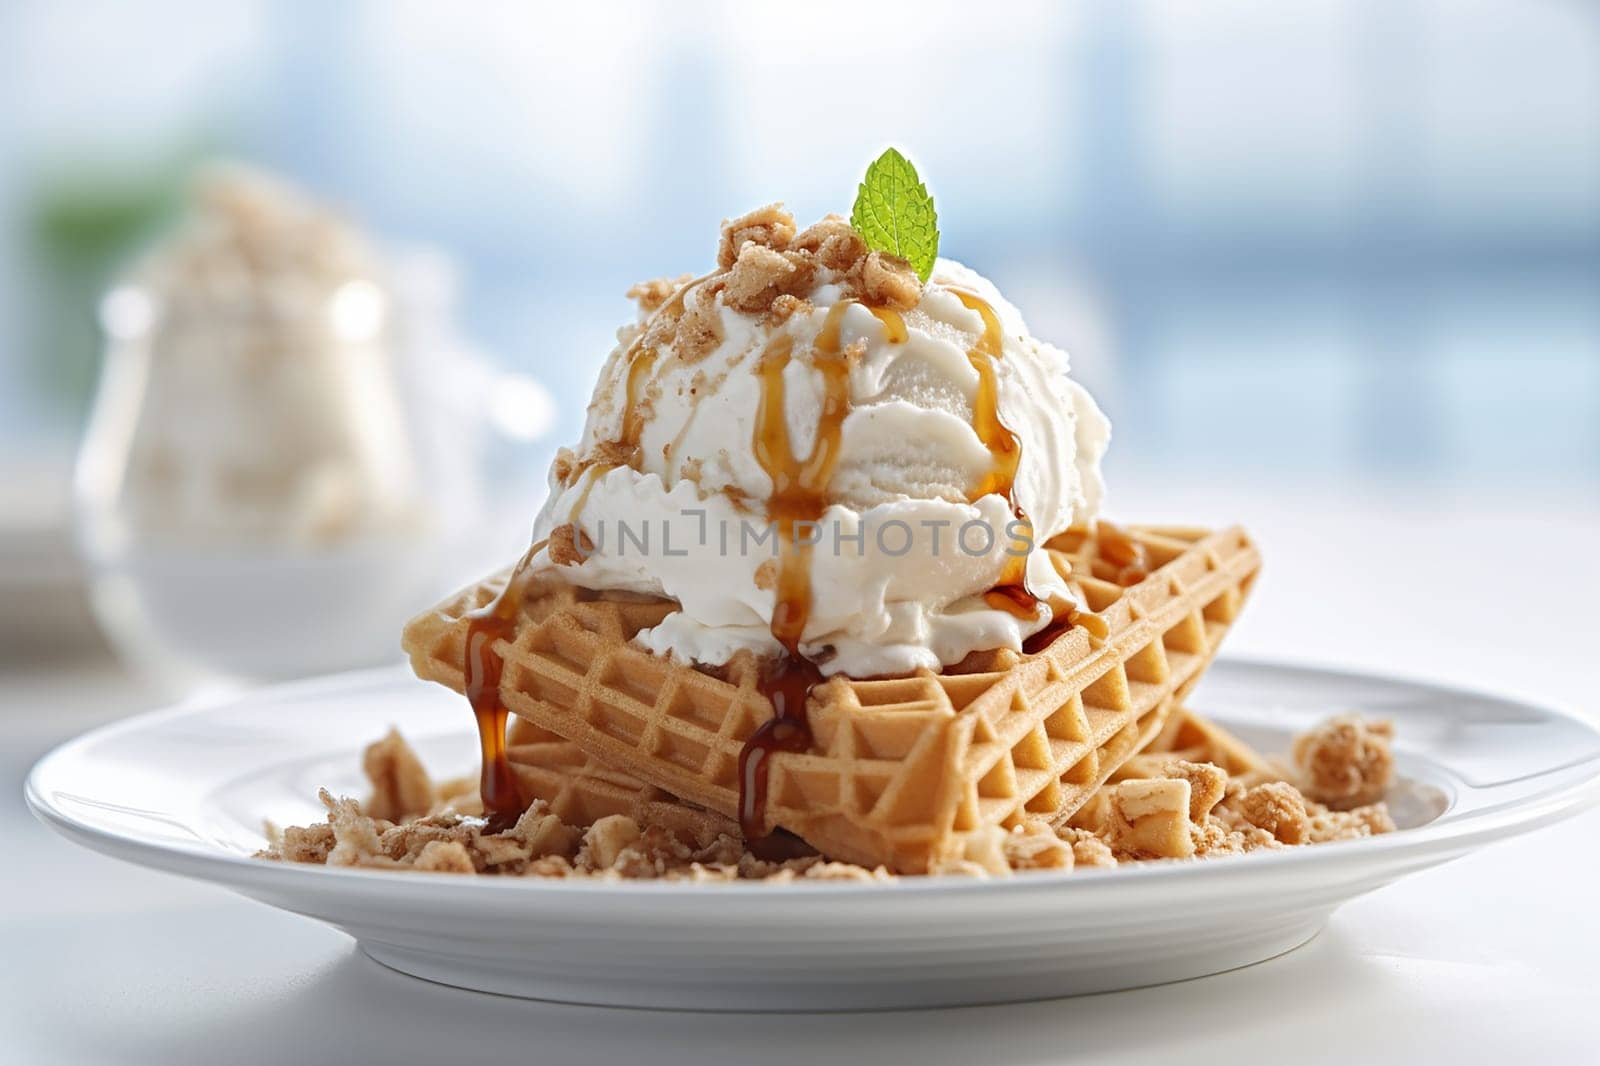 Vanilla ice cream on waffles drizzled with caramel sauce and nuts. by Hype2art